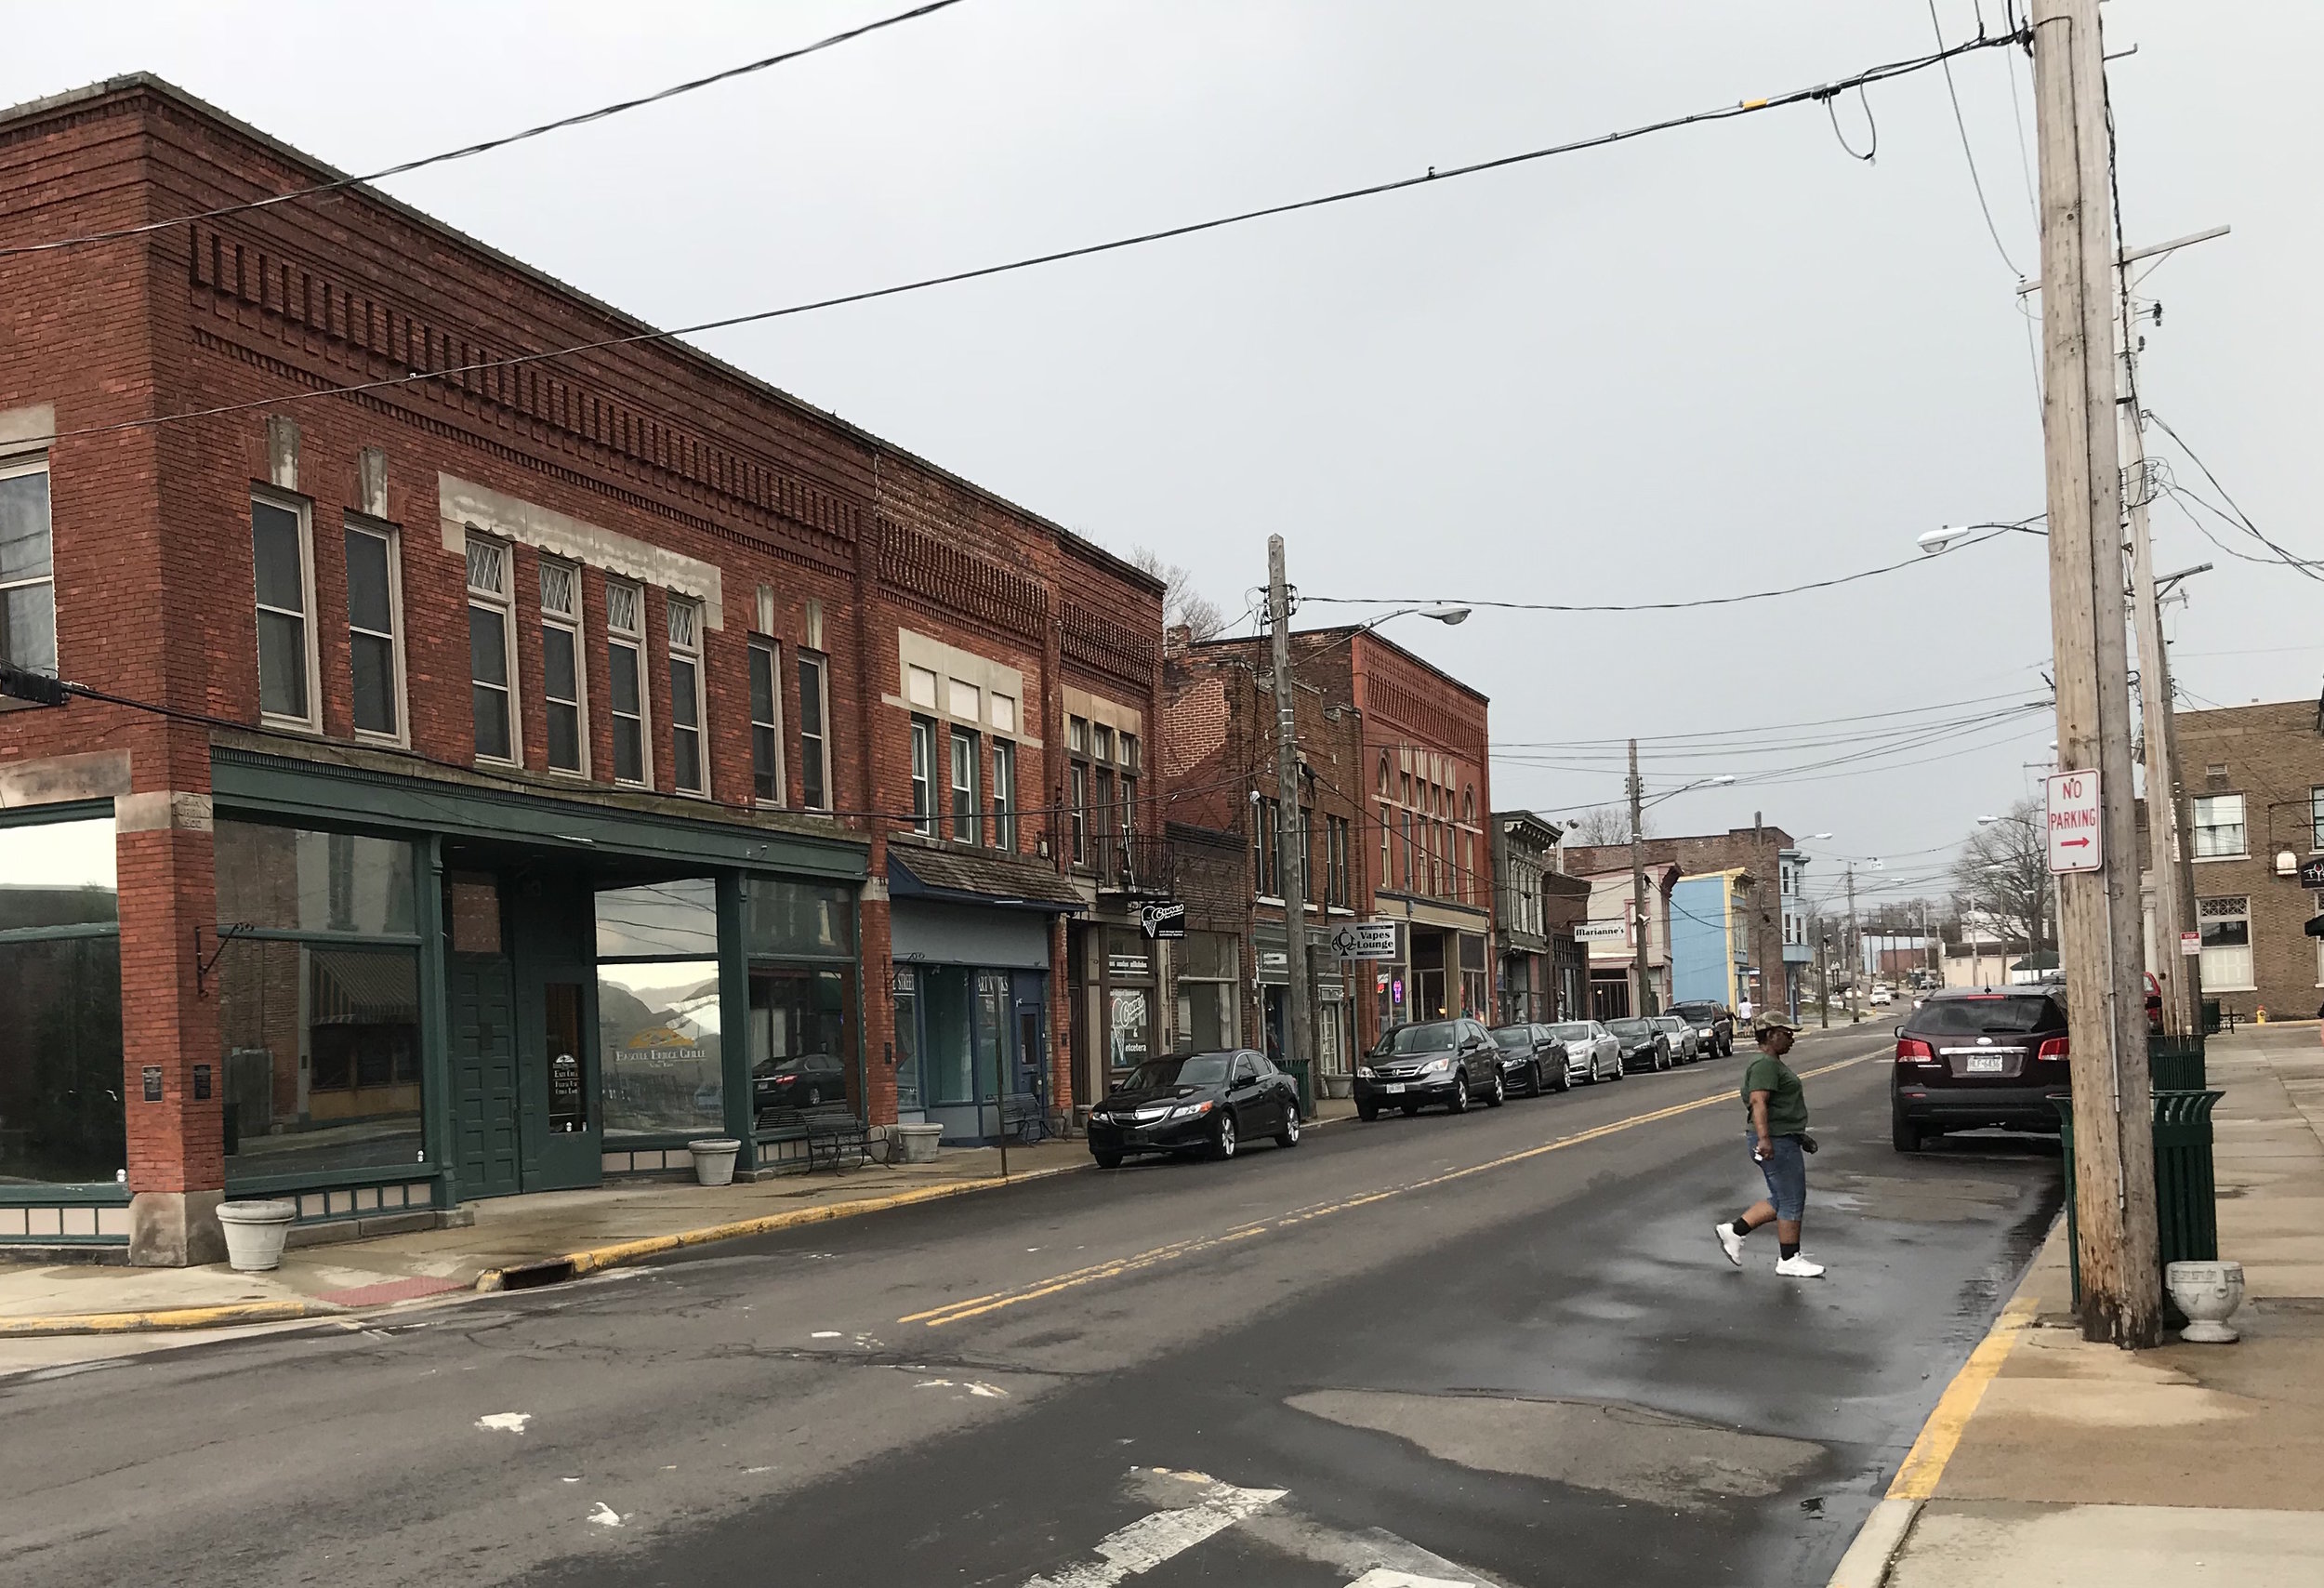  Ashtabula, Ohio: A few business struggle to survive the economic woes that have plagued northeast Ohio for years.  